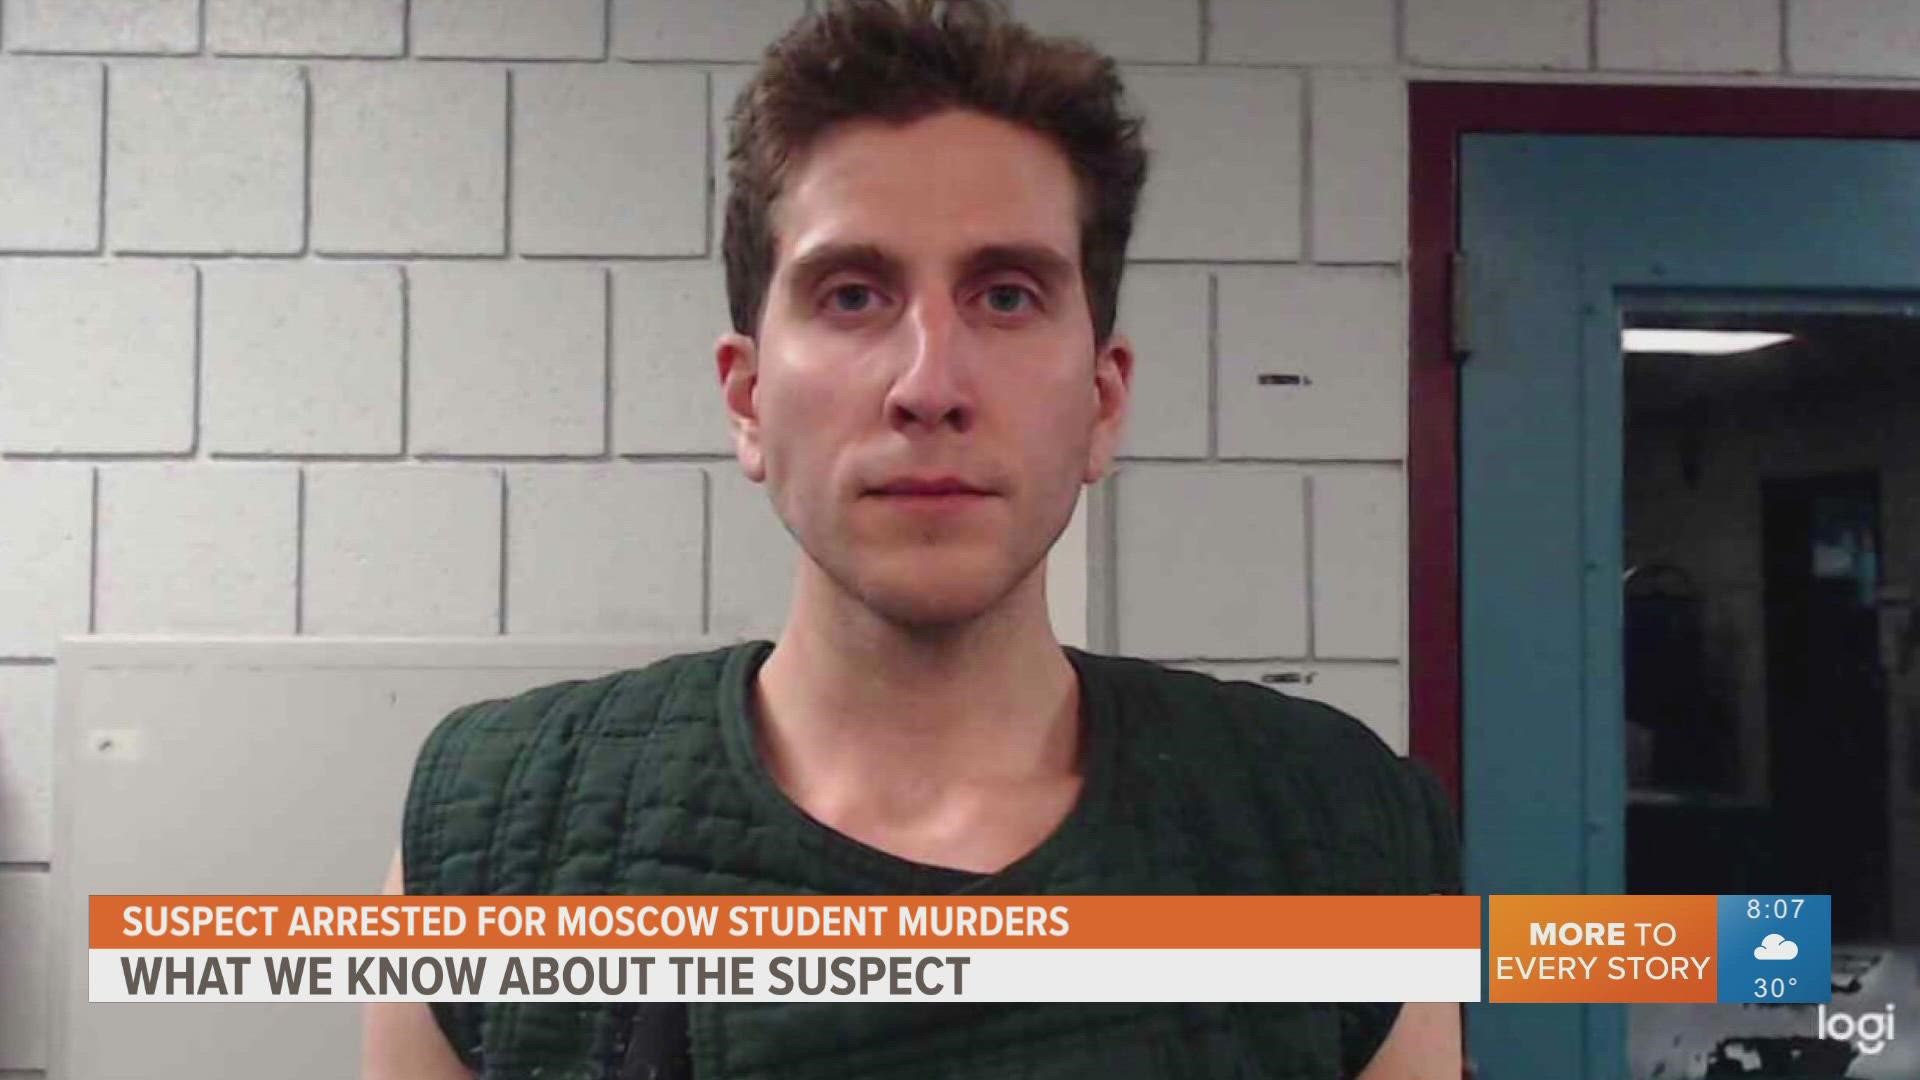 Bryan Kohberger, the suspect in the Moscow student murders is expected to be extradited to Idaho soon.